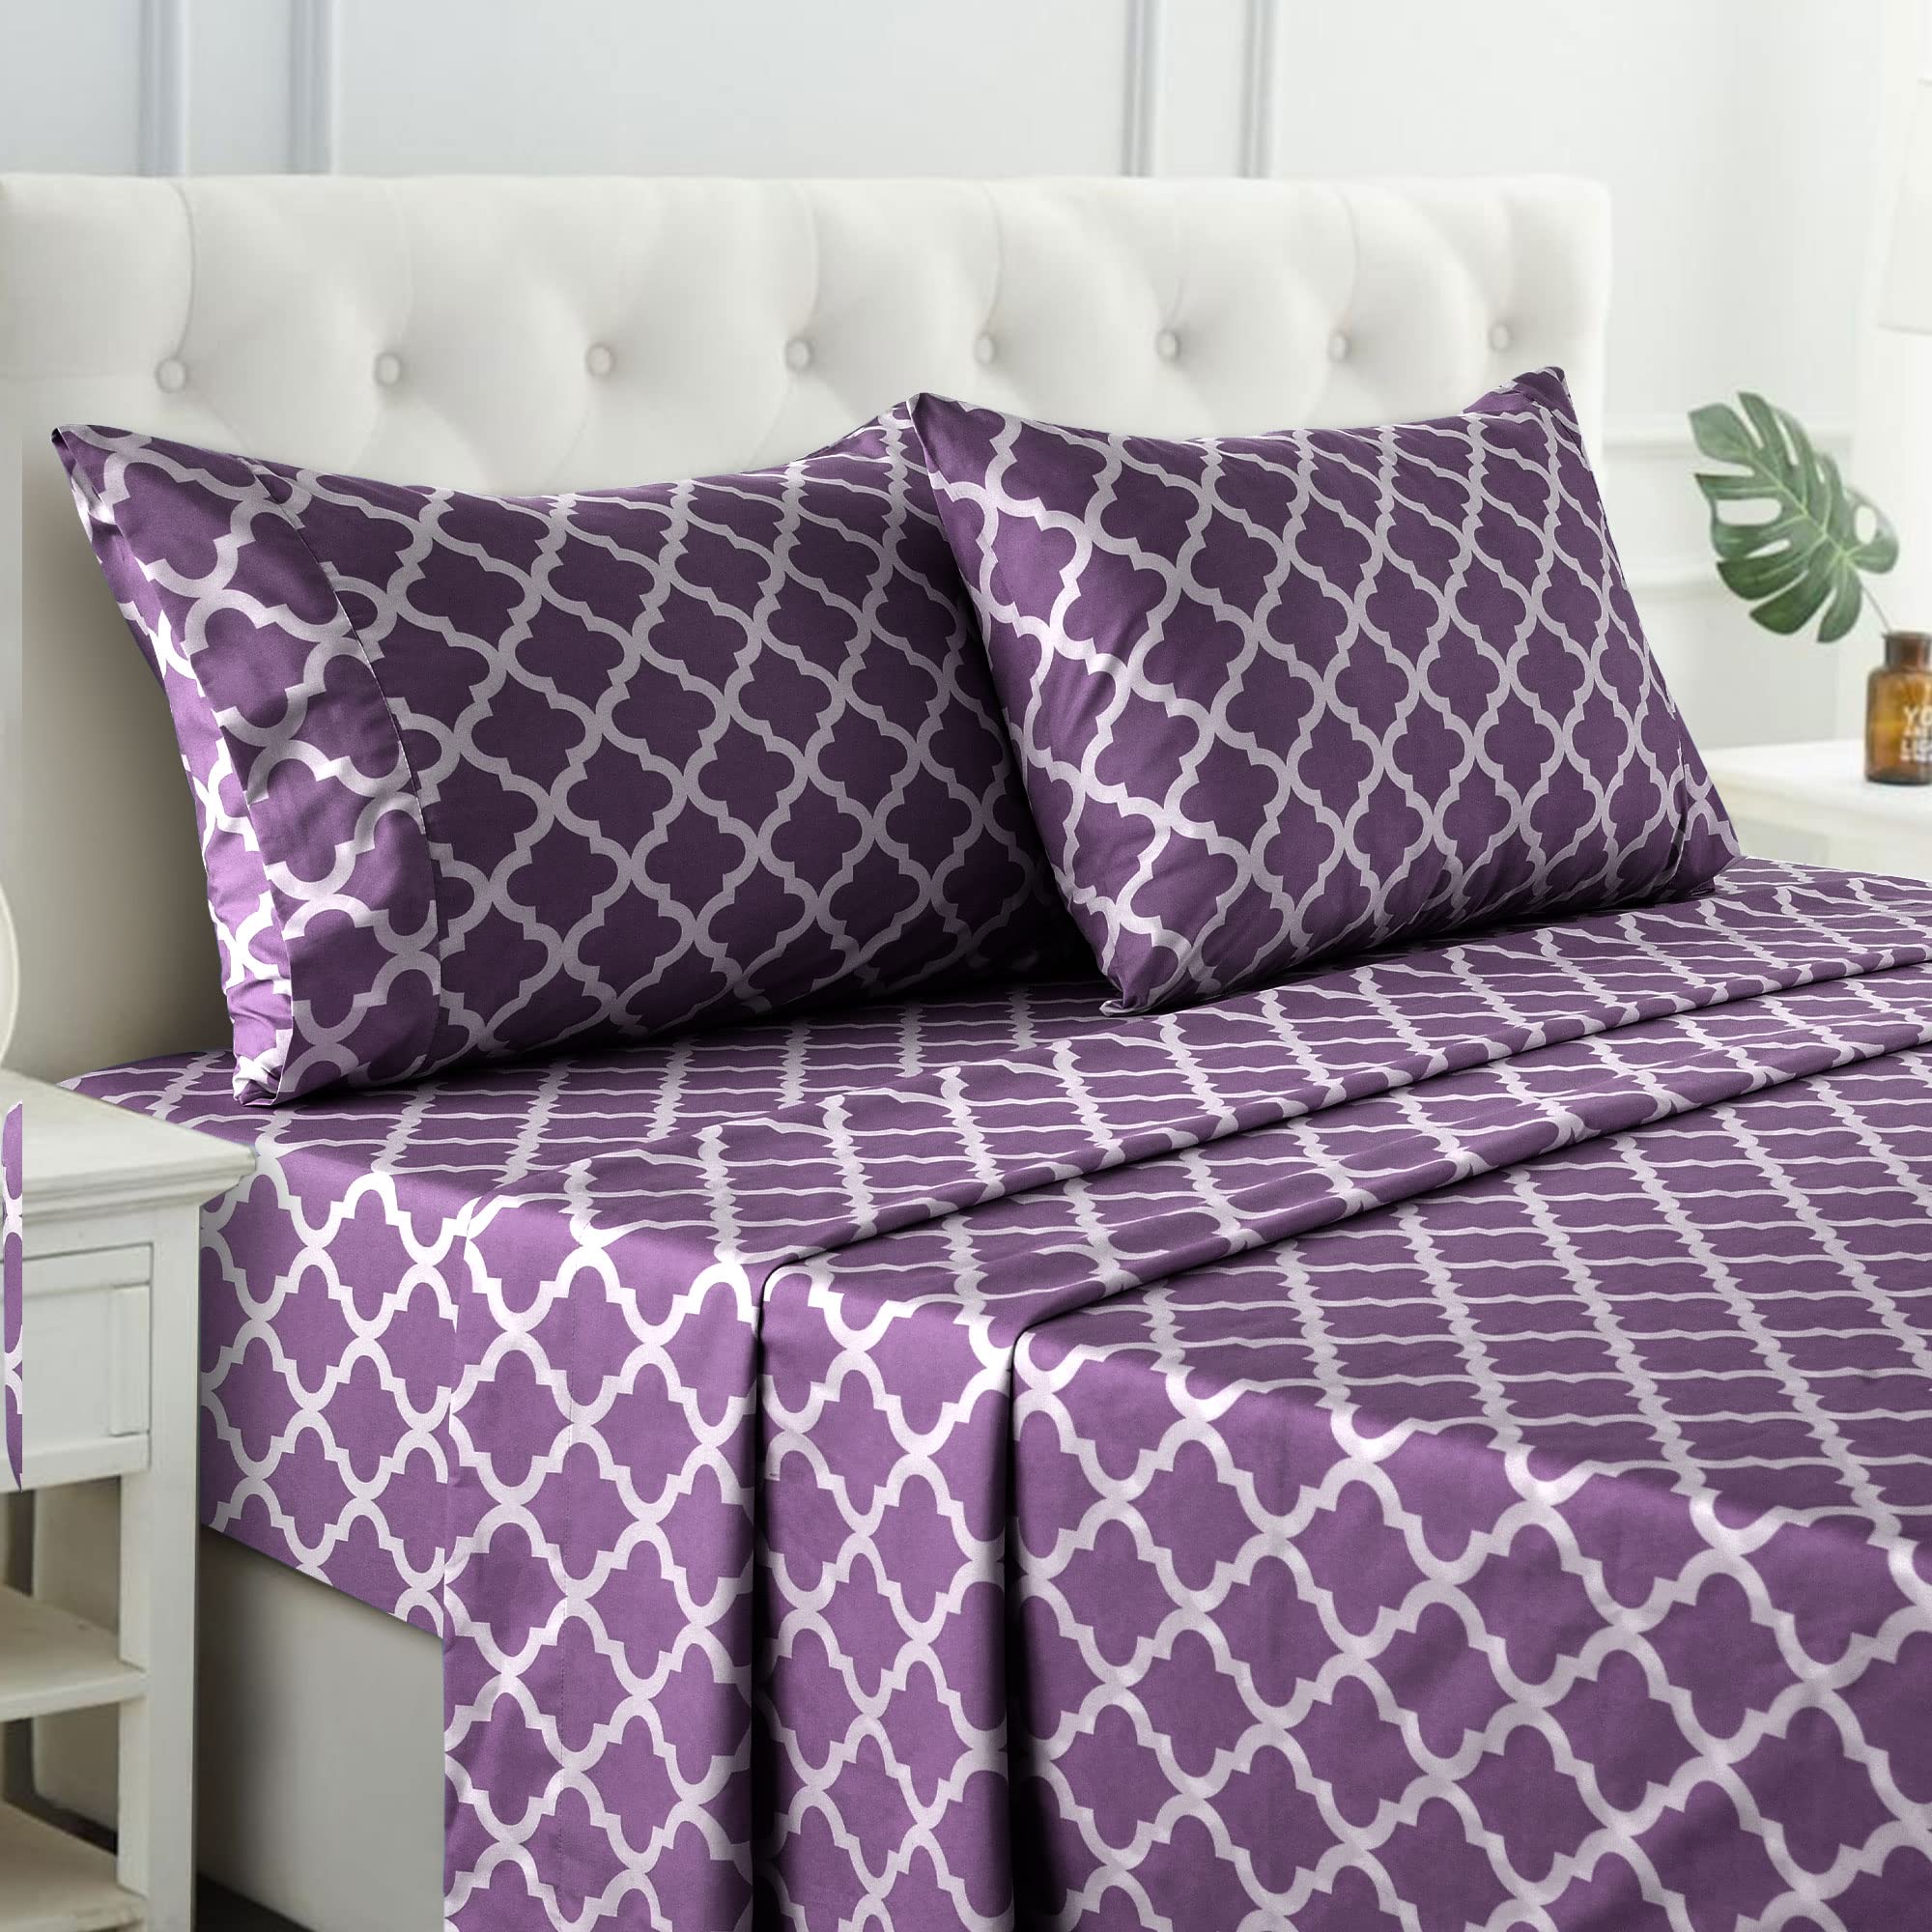 Book Cover Lux Decor Collection Bed Sheets - 4 Pc King Size Sheets - 1800 Thread Count Brushed Microfiber Sheets - 16 Inches Deep Pocket Bedding Sheets & Pillowcases (King, Quatrefoil Purple) Quatrefoil Purple King